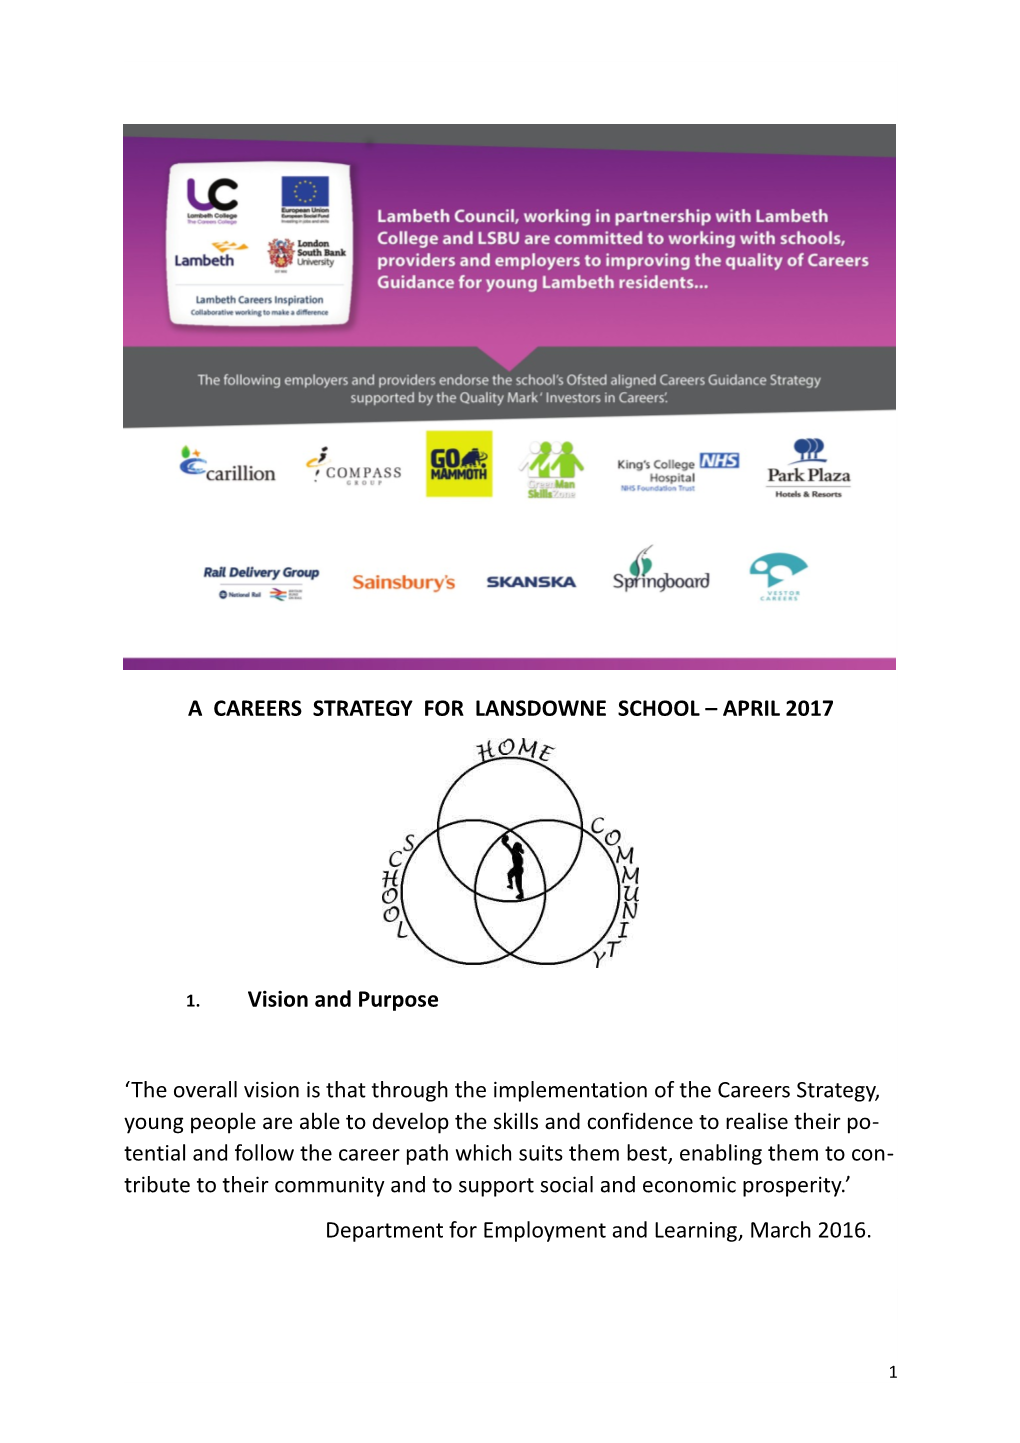 A Careers Strategy for Lansdowne School April 2017